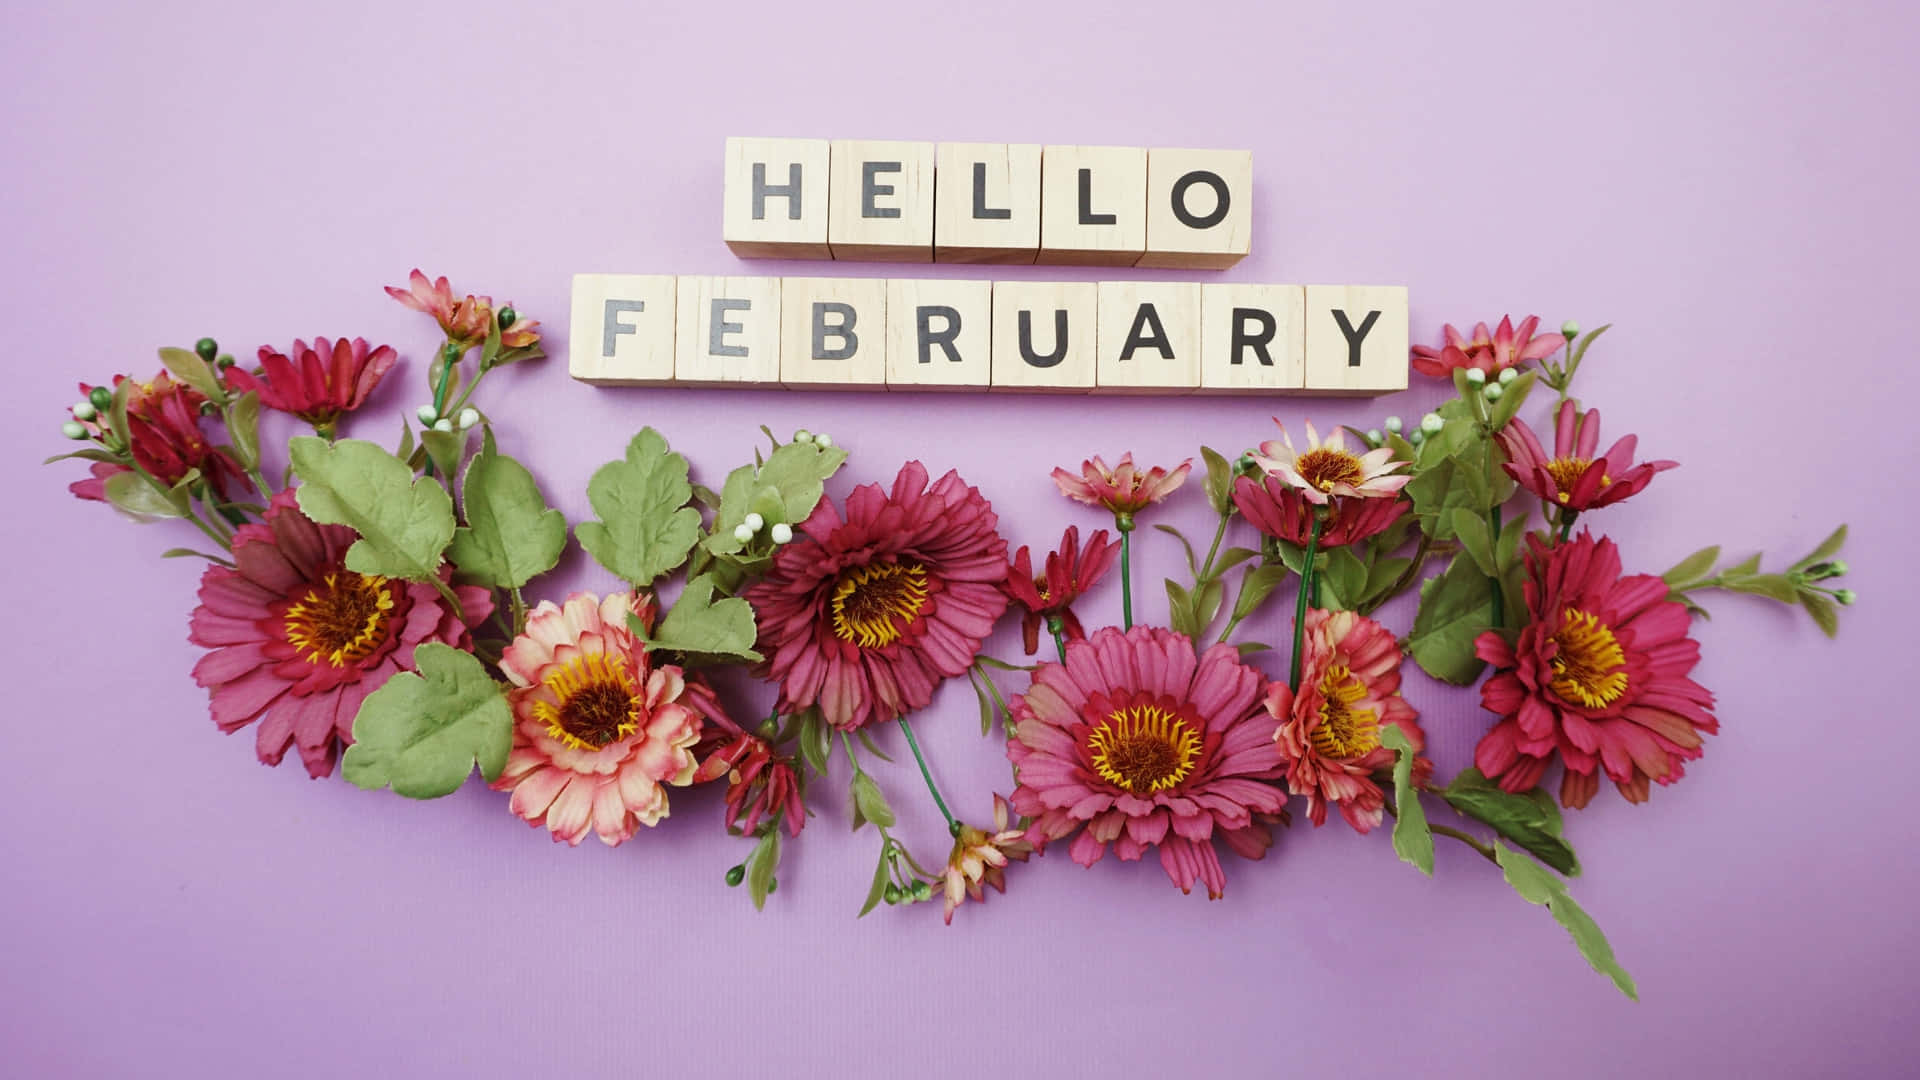 Hello February Floral Greeting Wallpaper